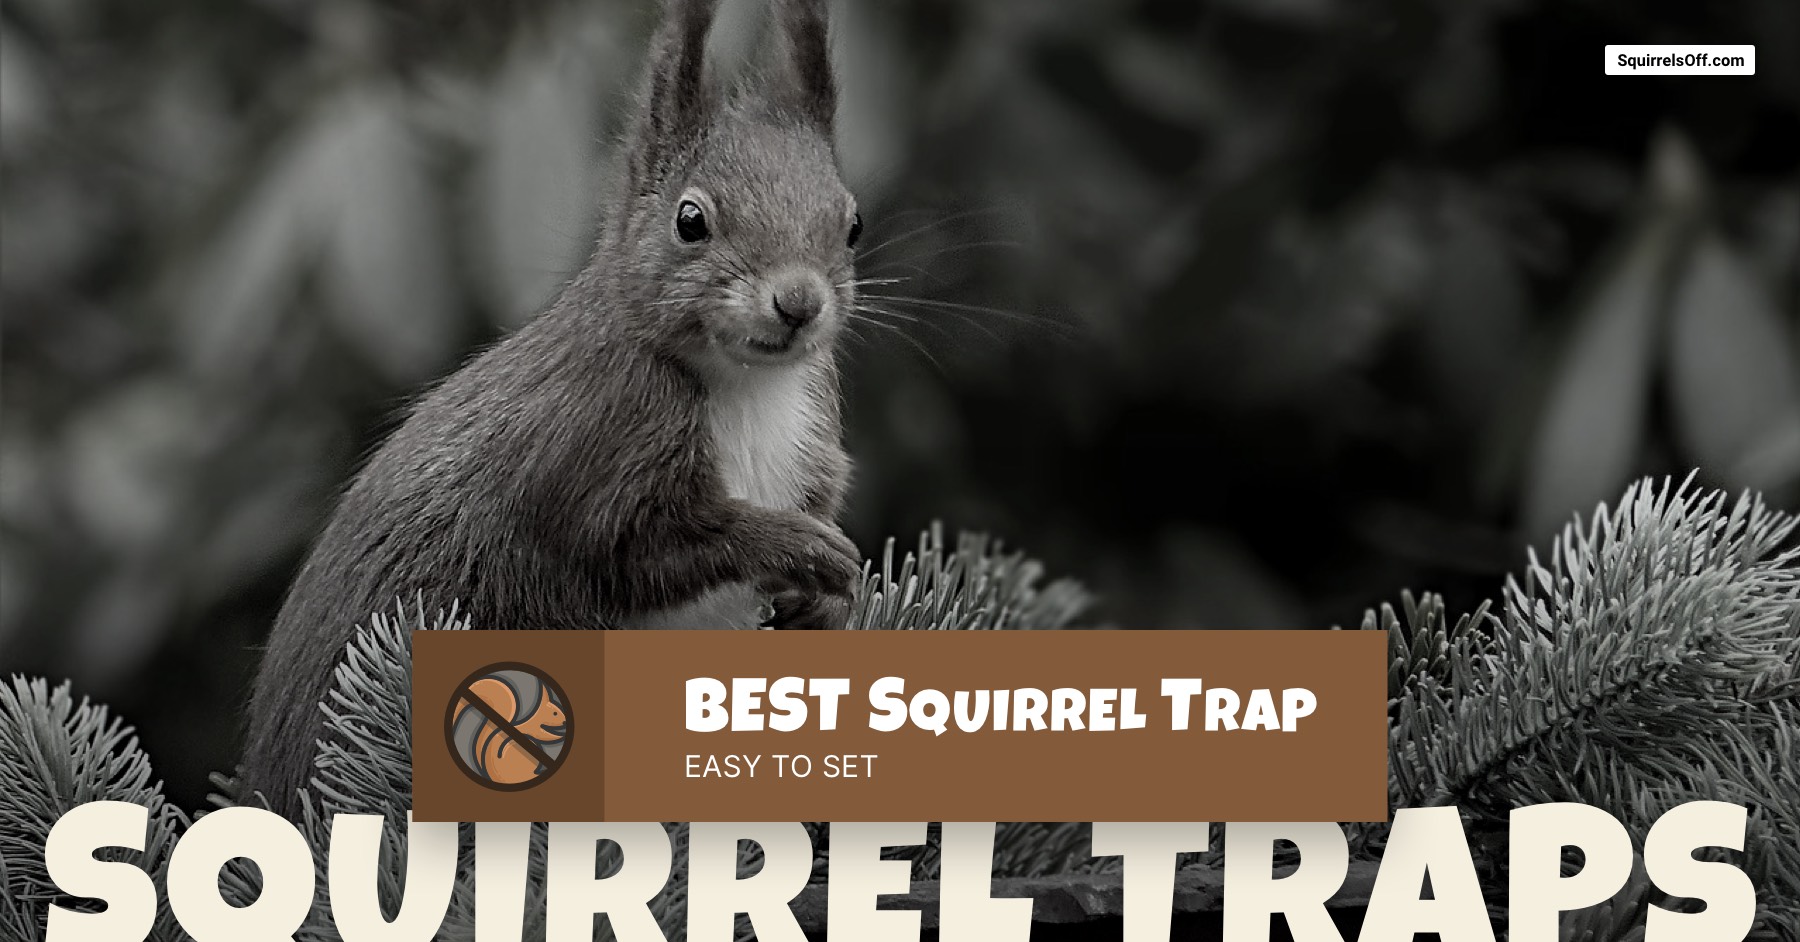 How to set and use a cage trap for squirrels 